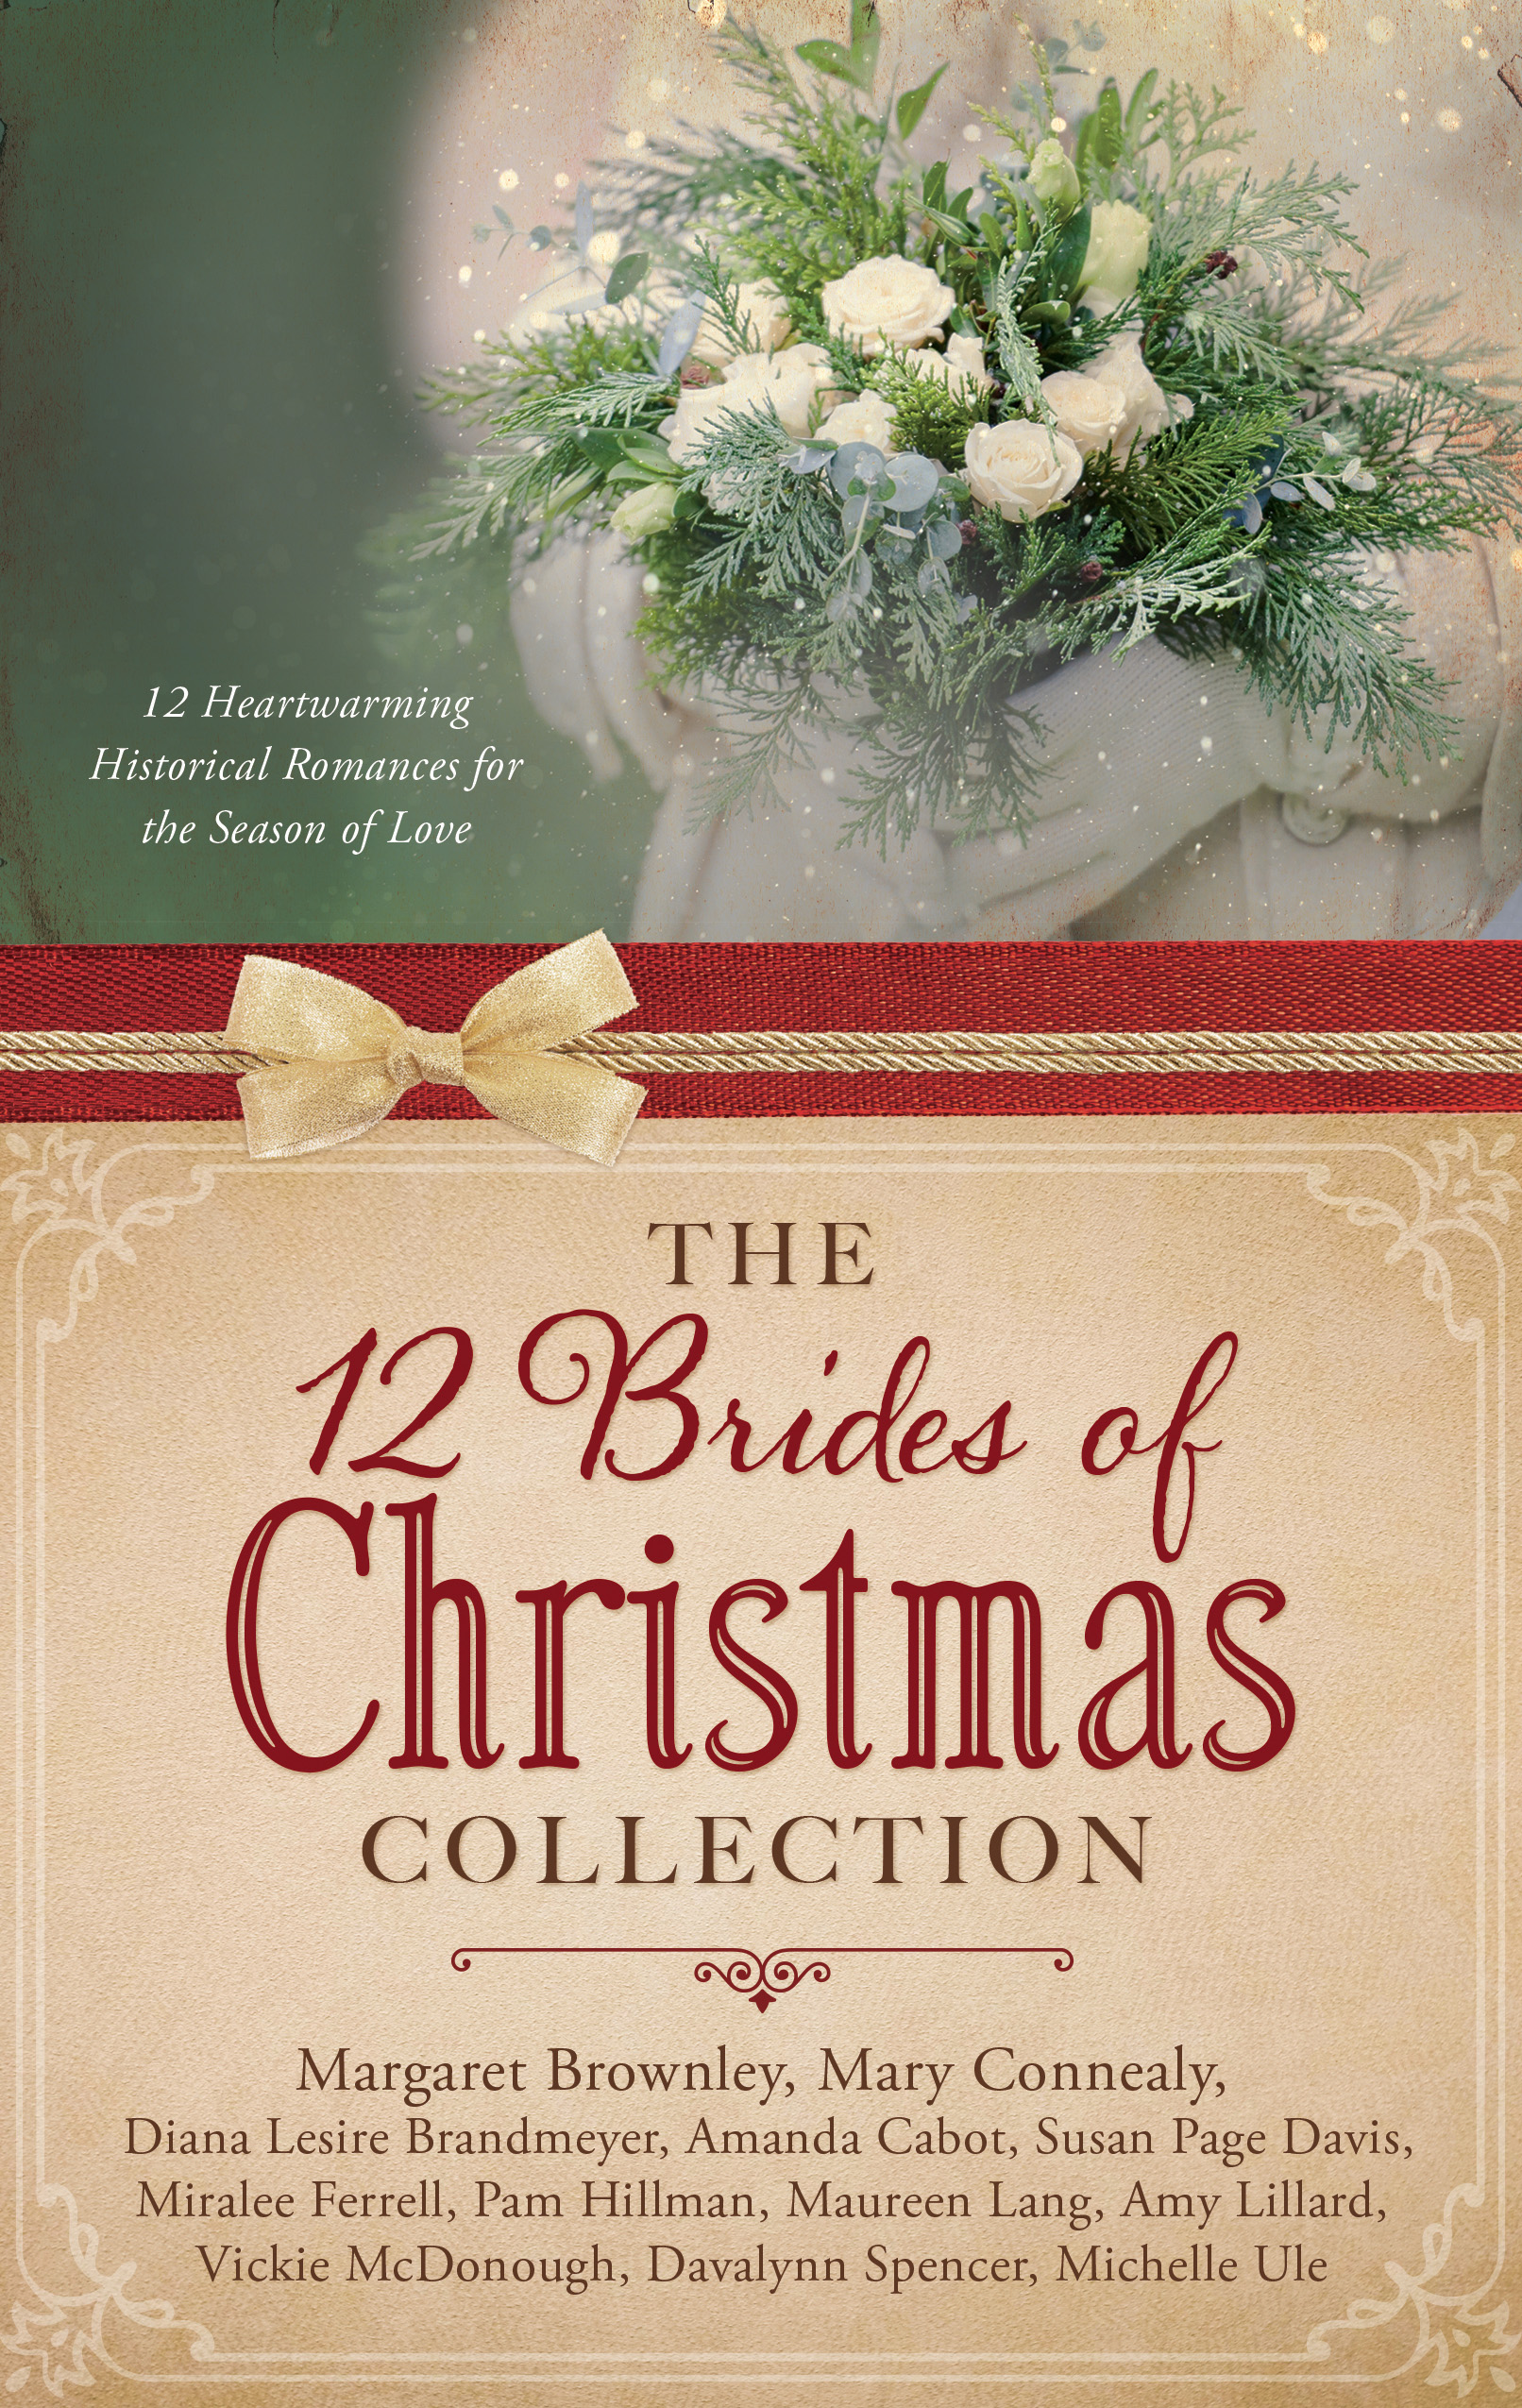 The 12 Brides of Christmas